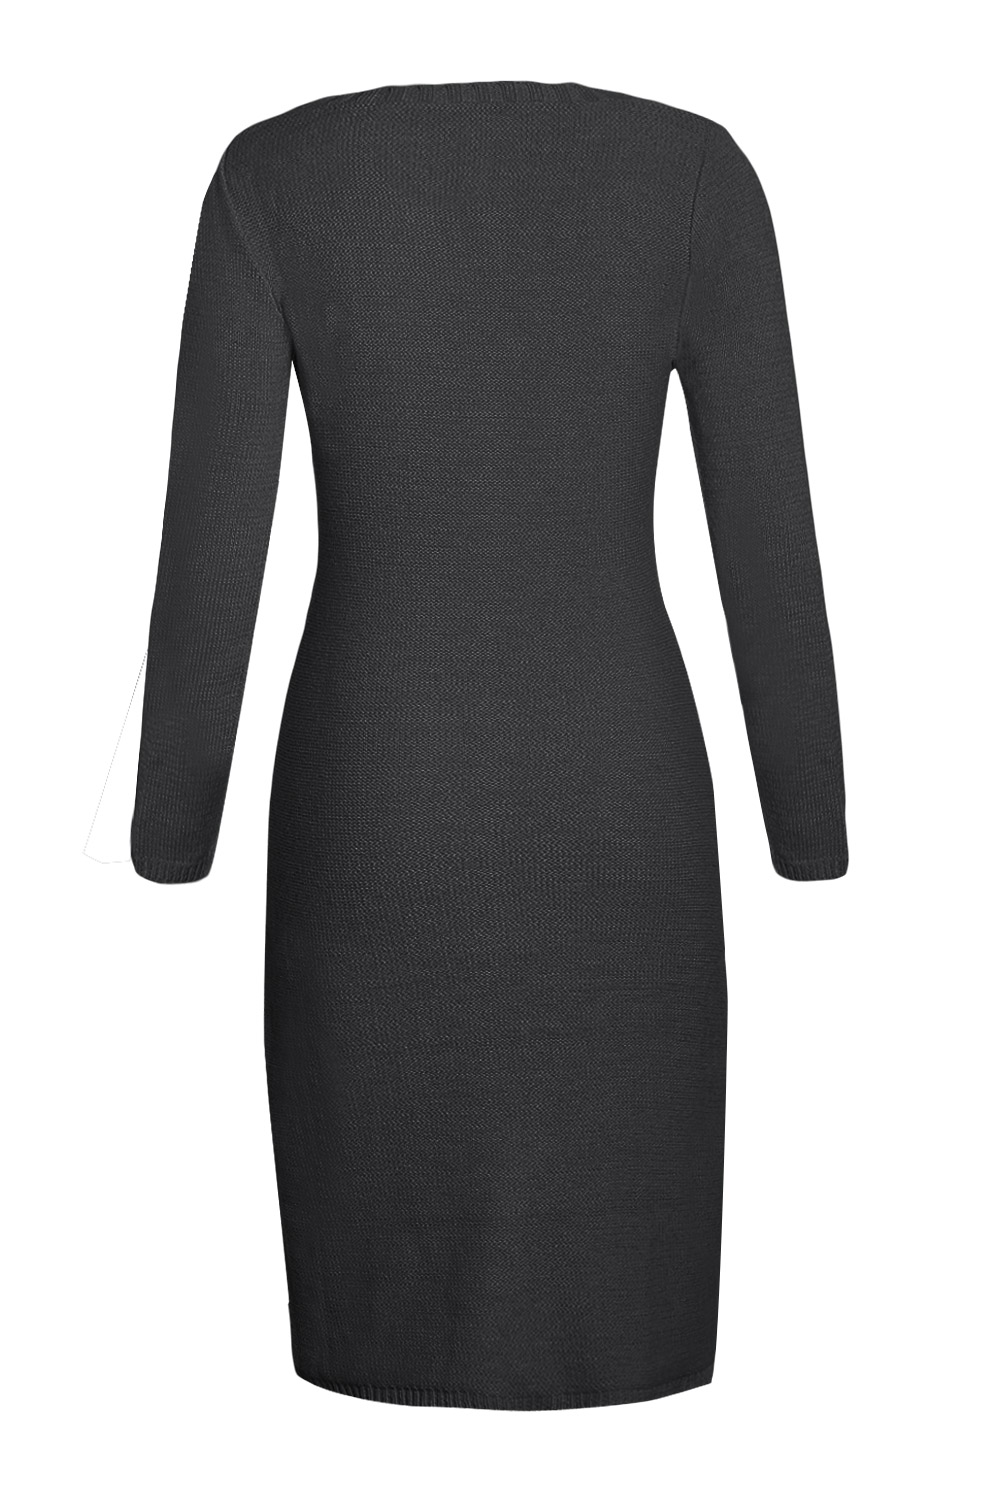 BY27772-2 Black Womens Hand Knitted Sweater Dress